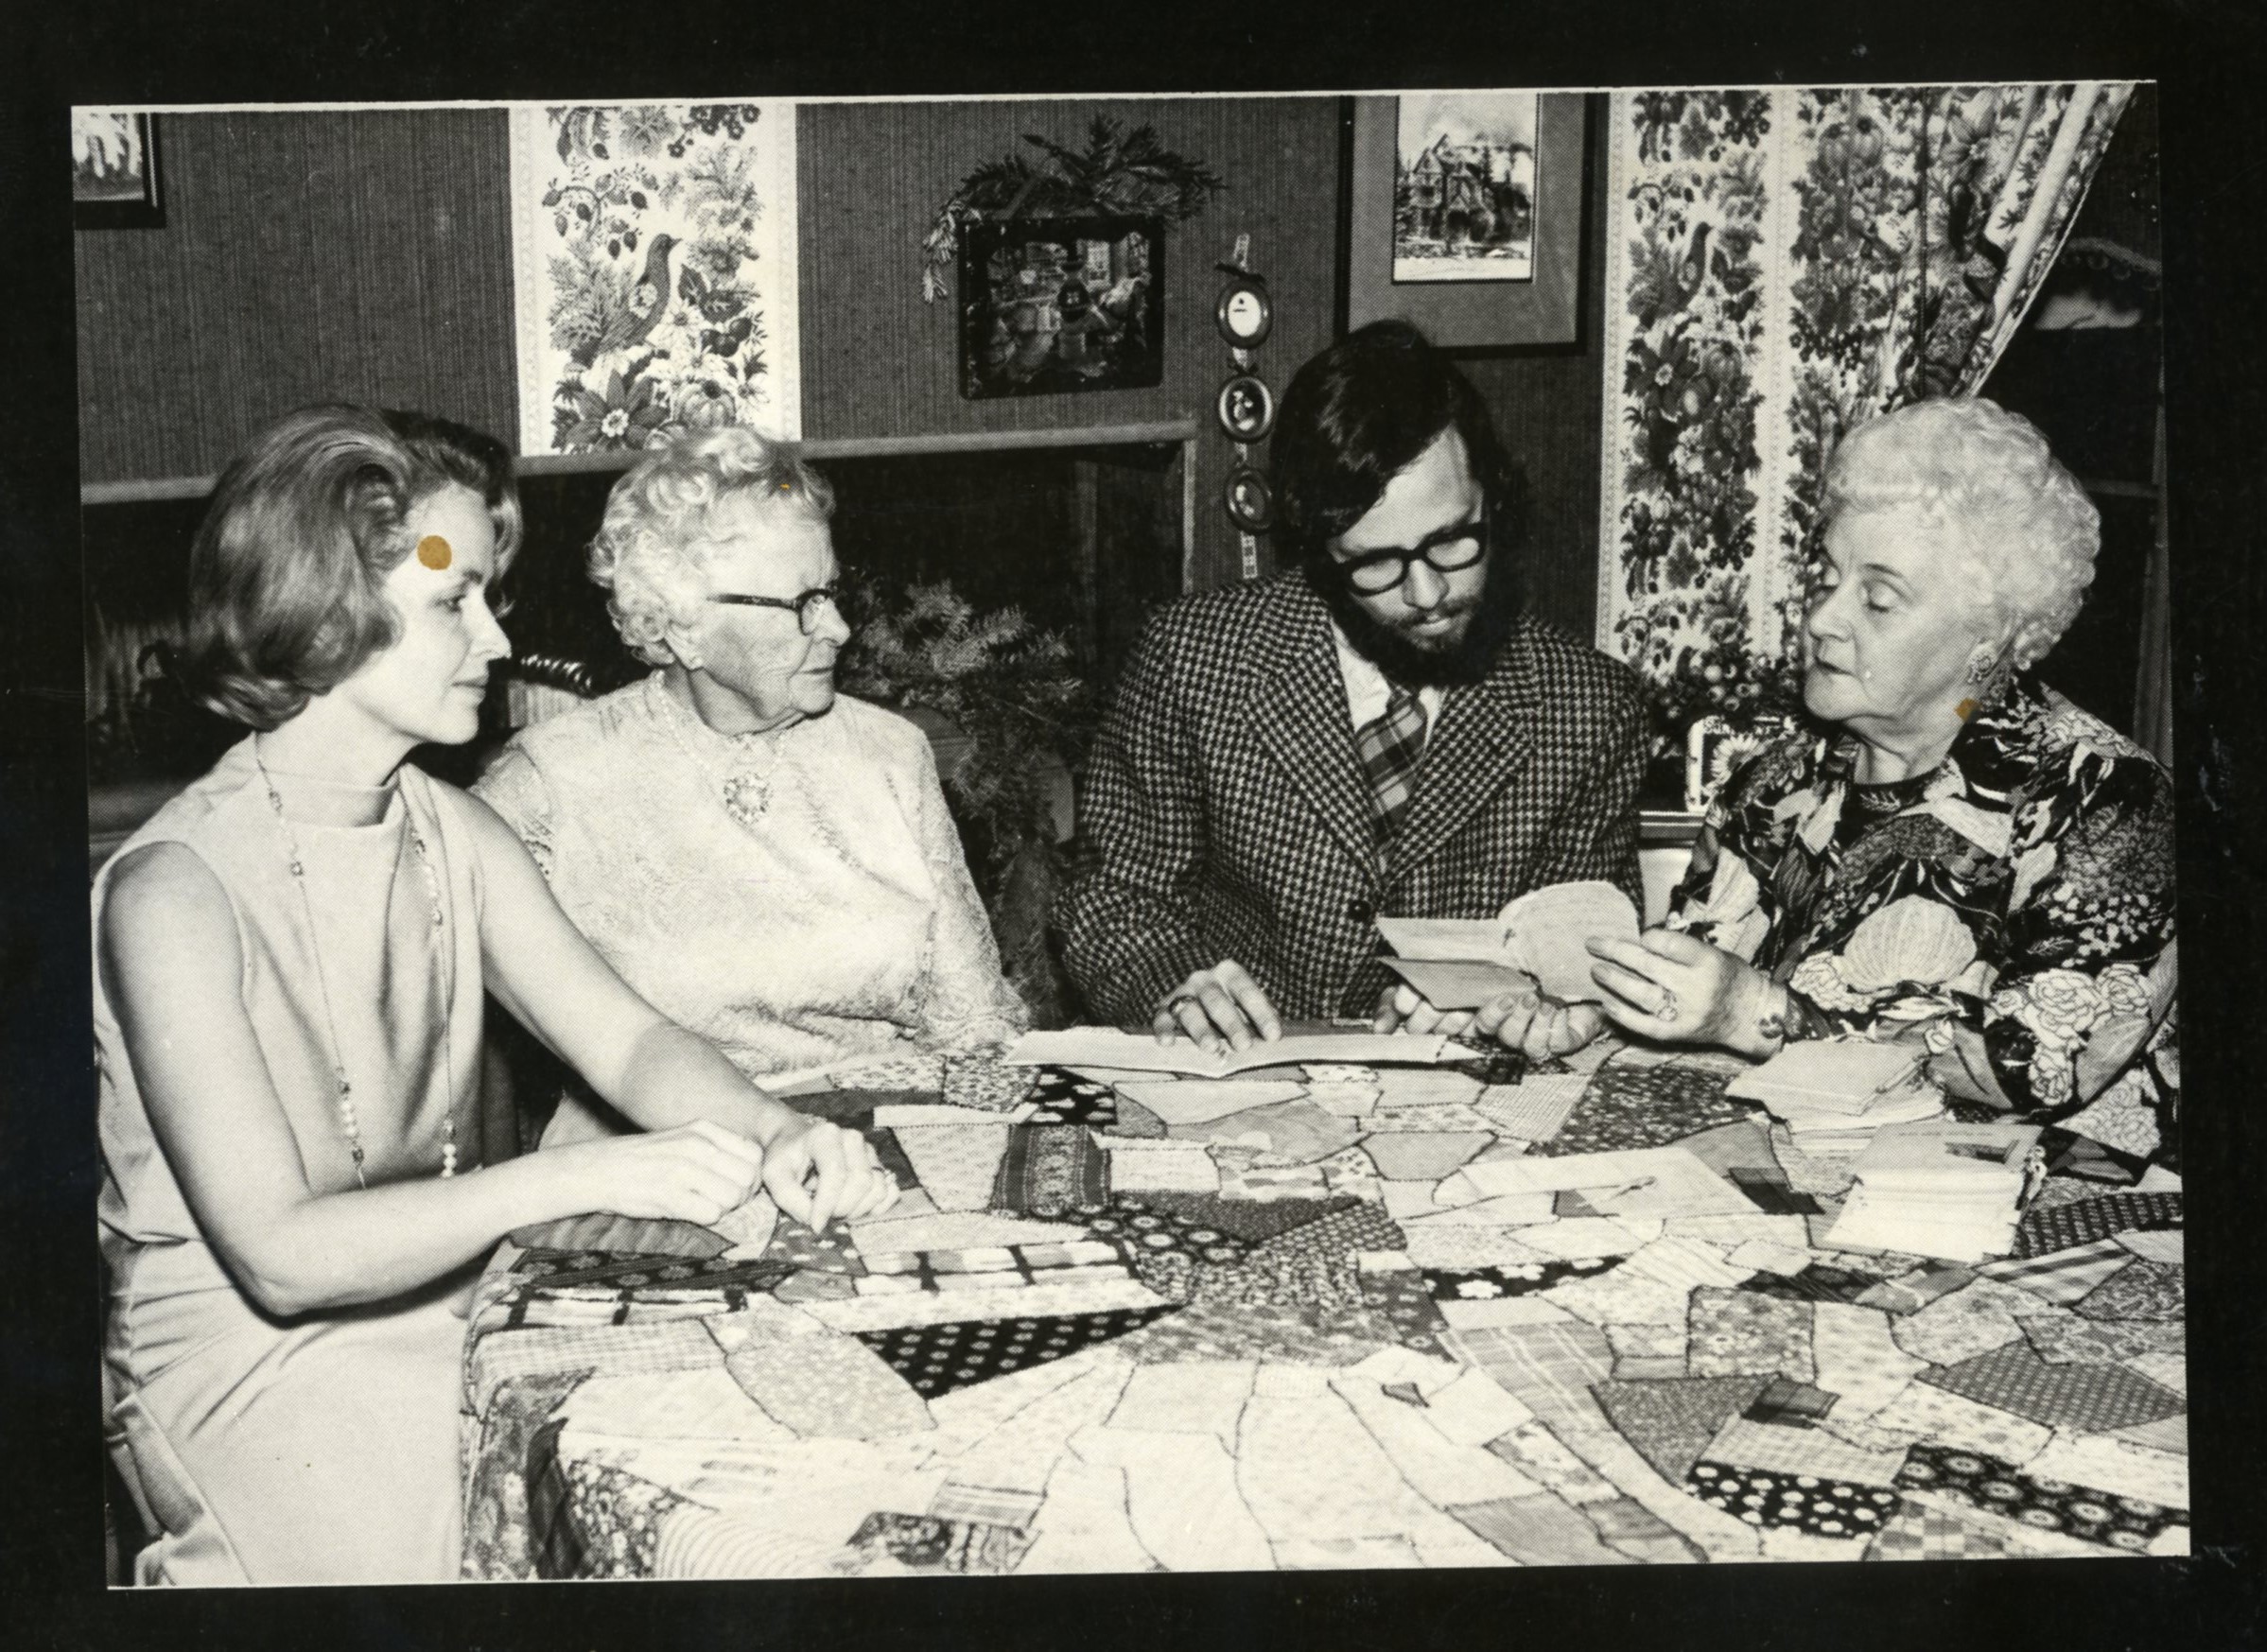 George Elliot Club, December 1974. Left to right: Virginia Mastin, Mabel Lyman, Lawrence Pizer and Helen Clance. Courtesy of Adams County Historical Society.